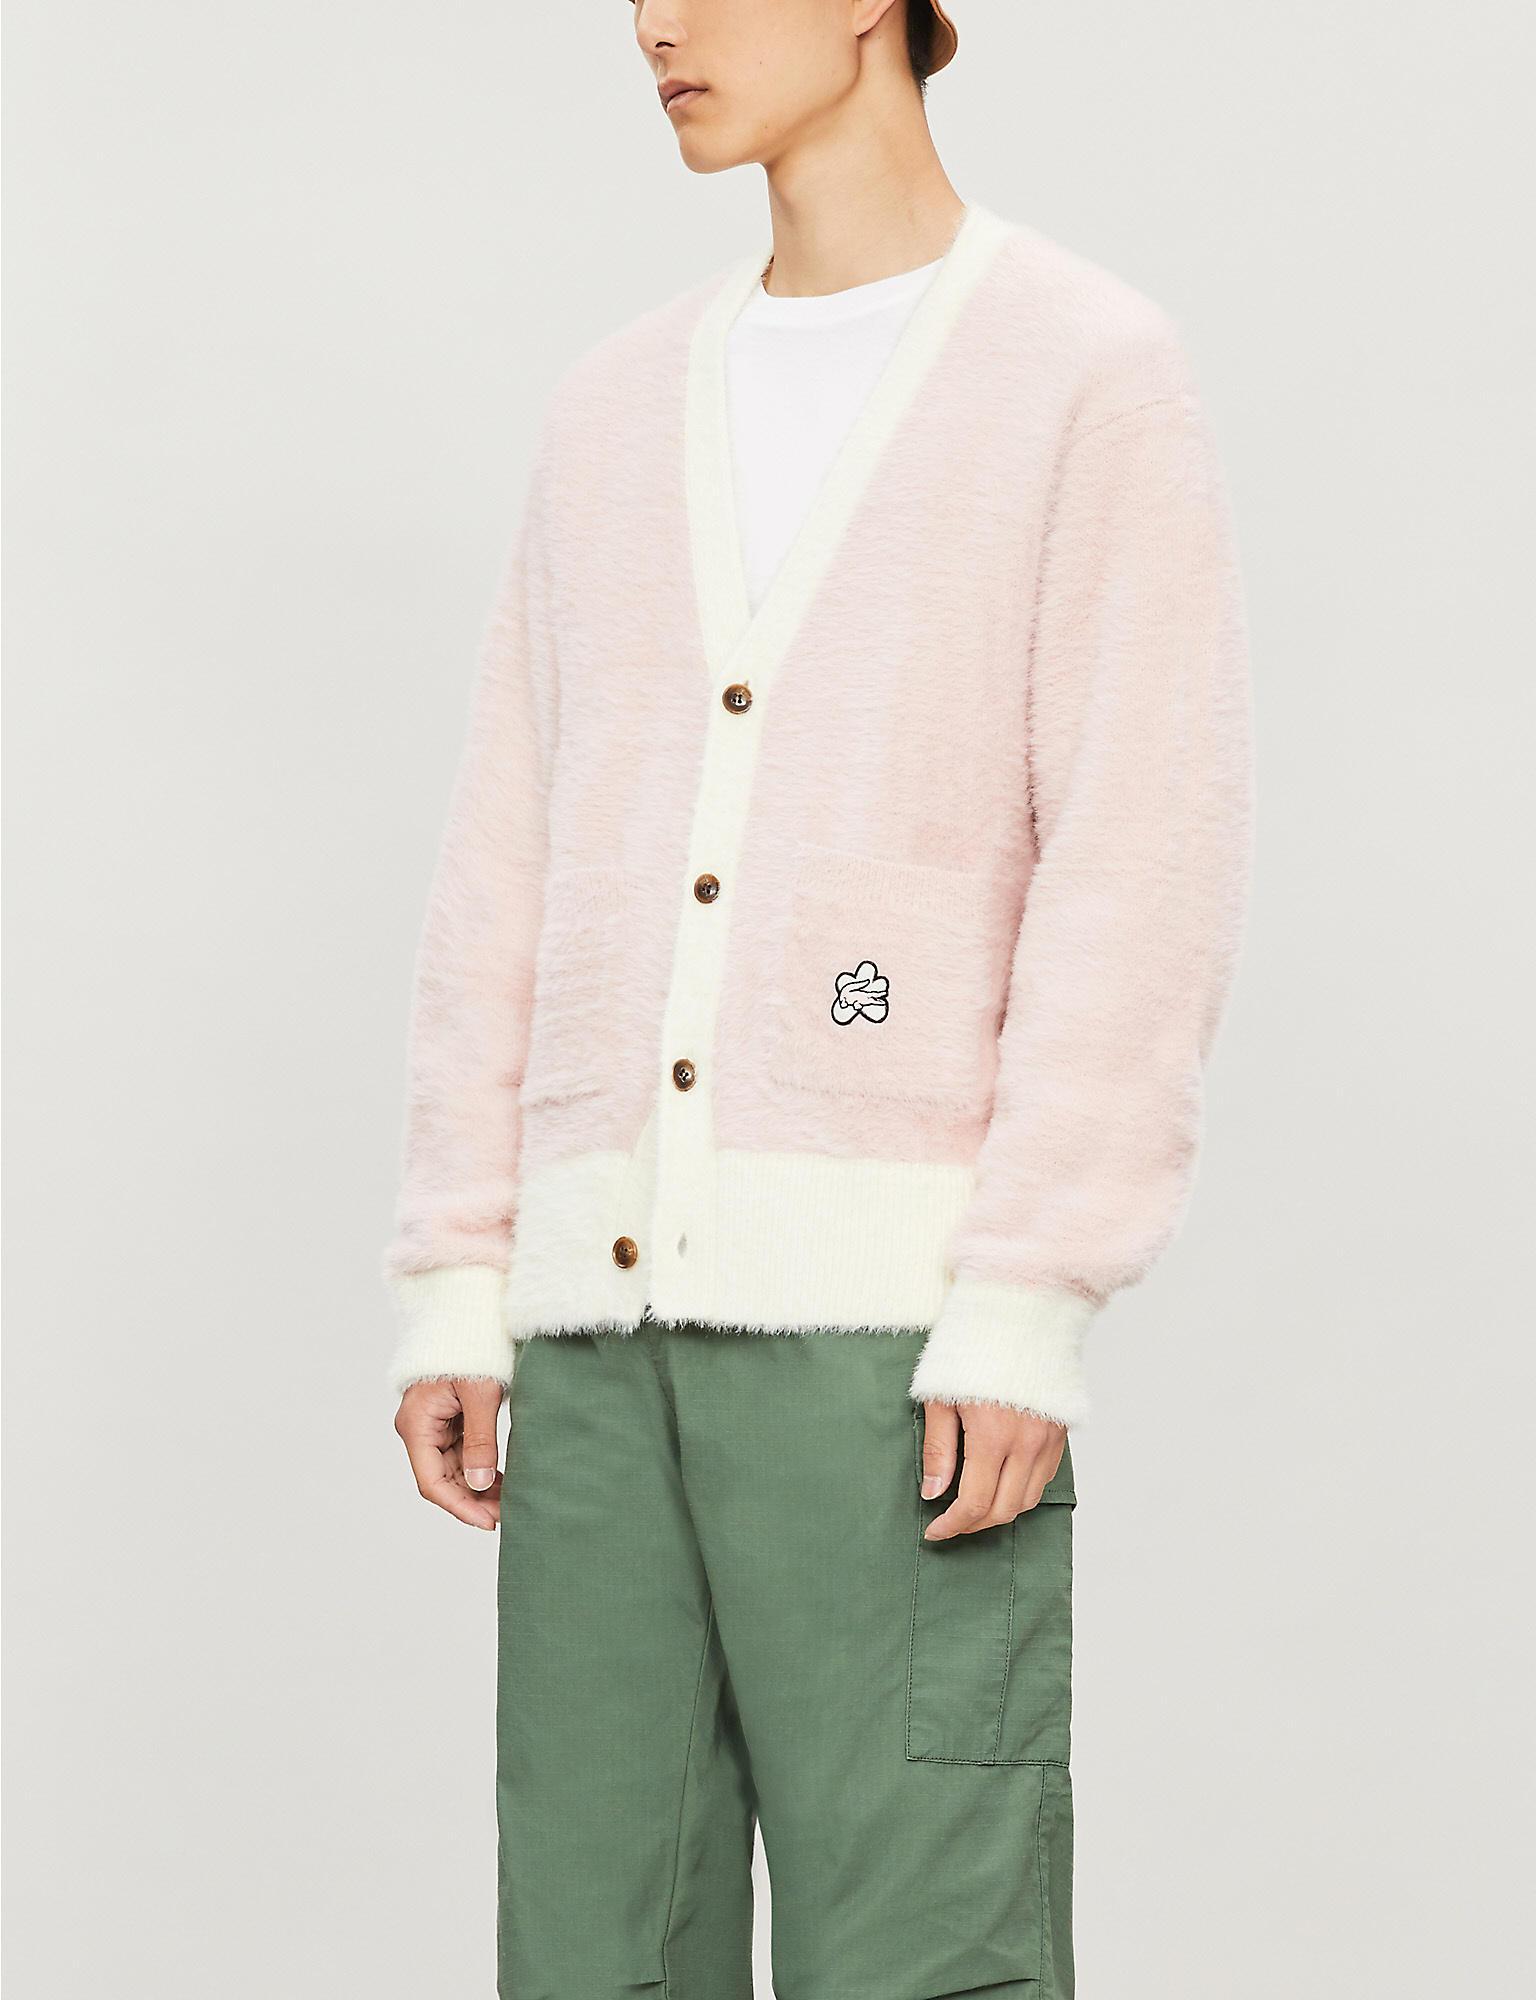 Golf Lacoste Cardigan Online, SAVE 52%.